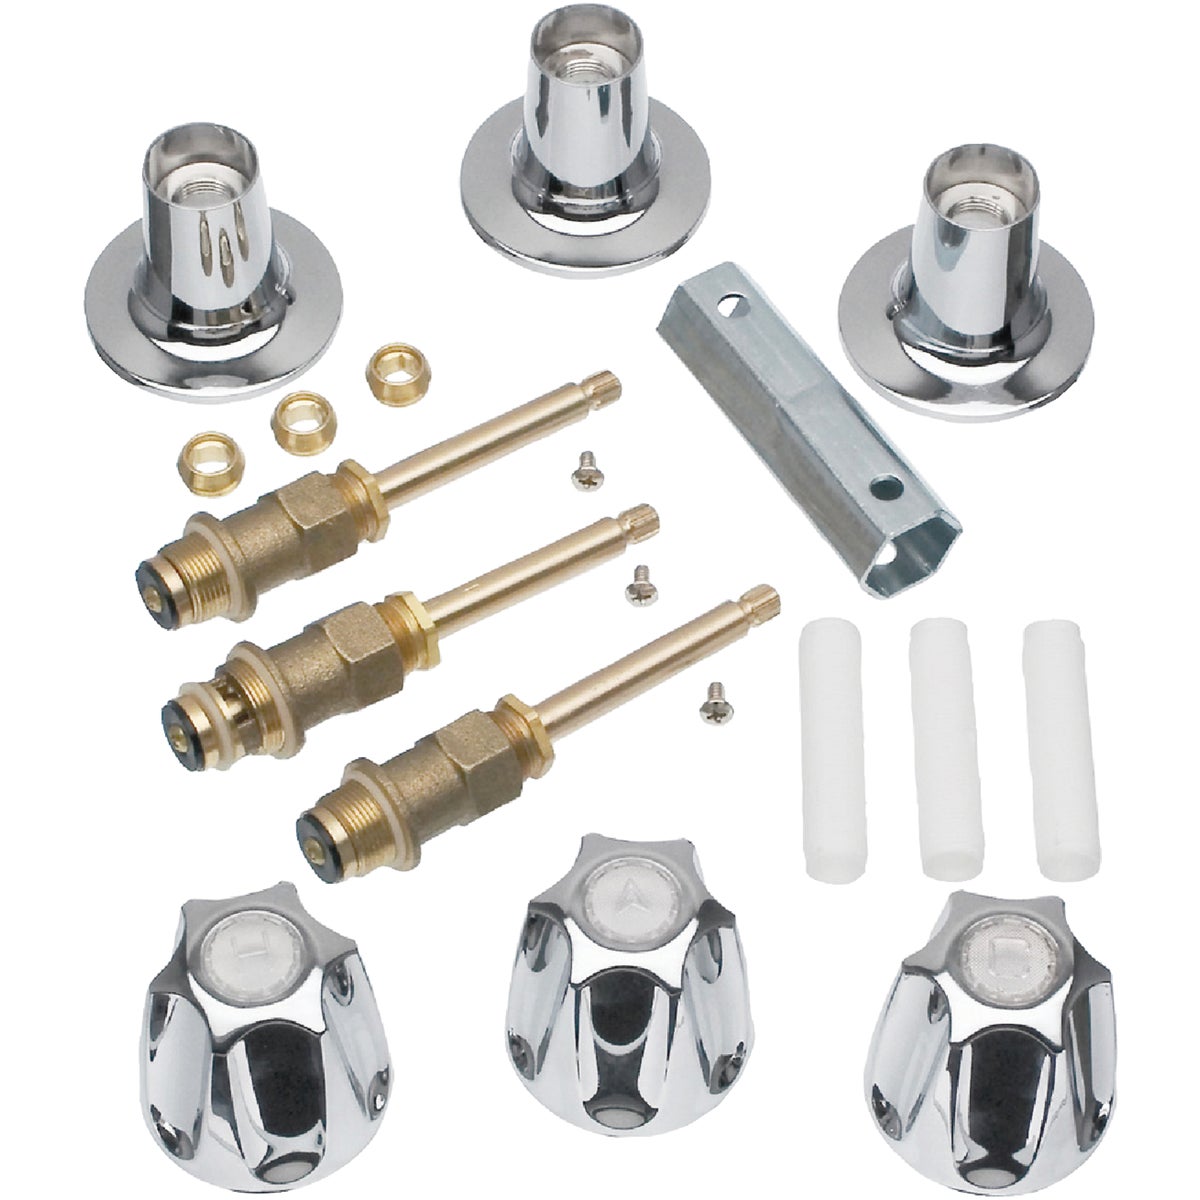 Item 484288, Everything you need to remodel your Price Pfister tub/shower faucet.